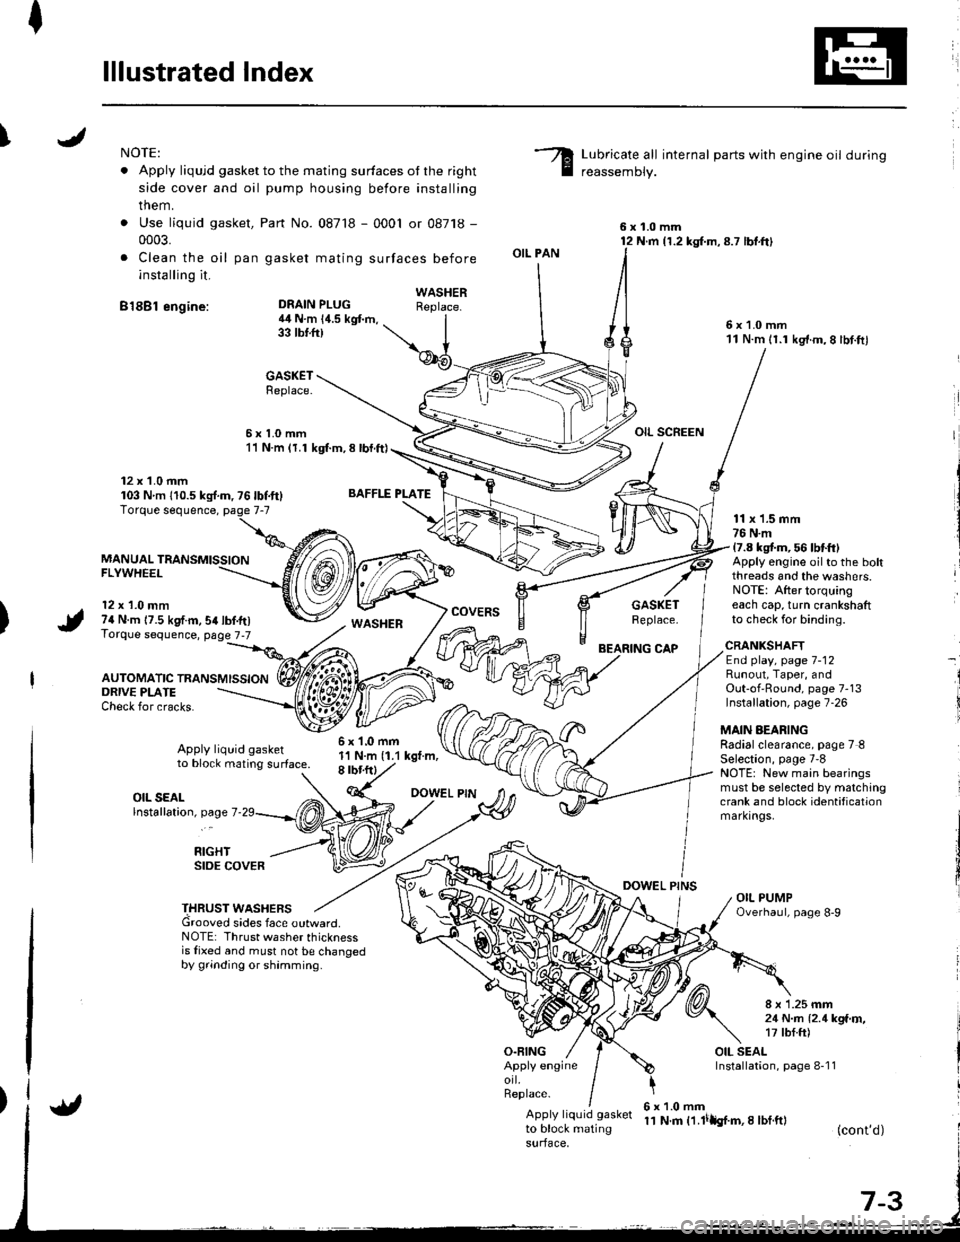 HONDA INTEGRA 1998 4.G Workshop Manual I
lllustrated Index
INOTE:
. Apply liqujd gasket to the mating surfaces ot the right
side cover and oil pump housing before installing
them.
. Use liquid gasket,
0003.
. Clea n the oil pan
installing 